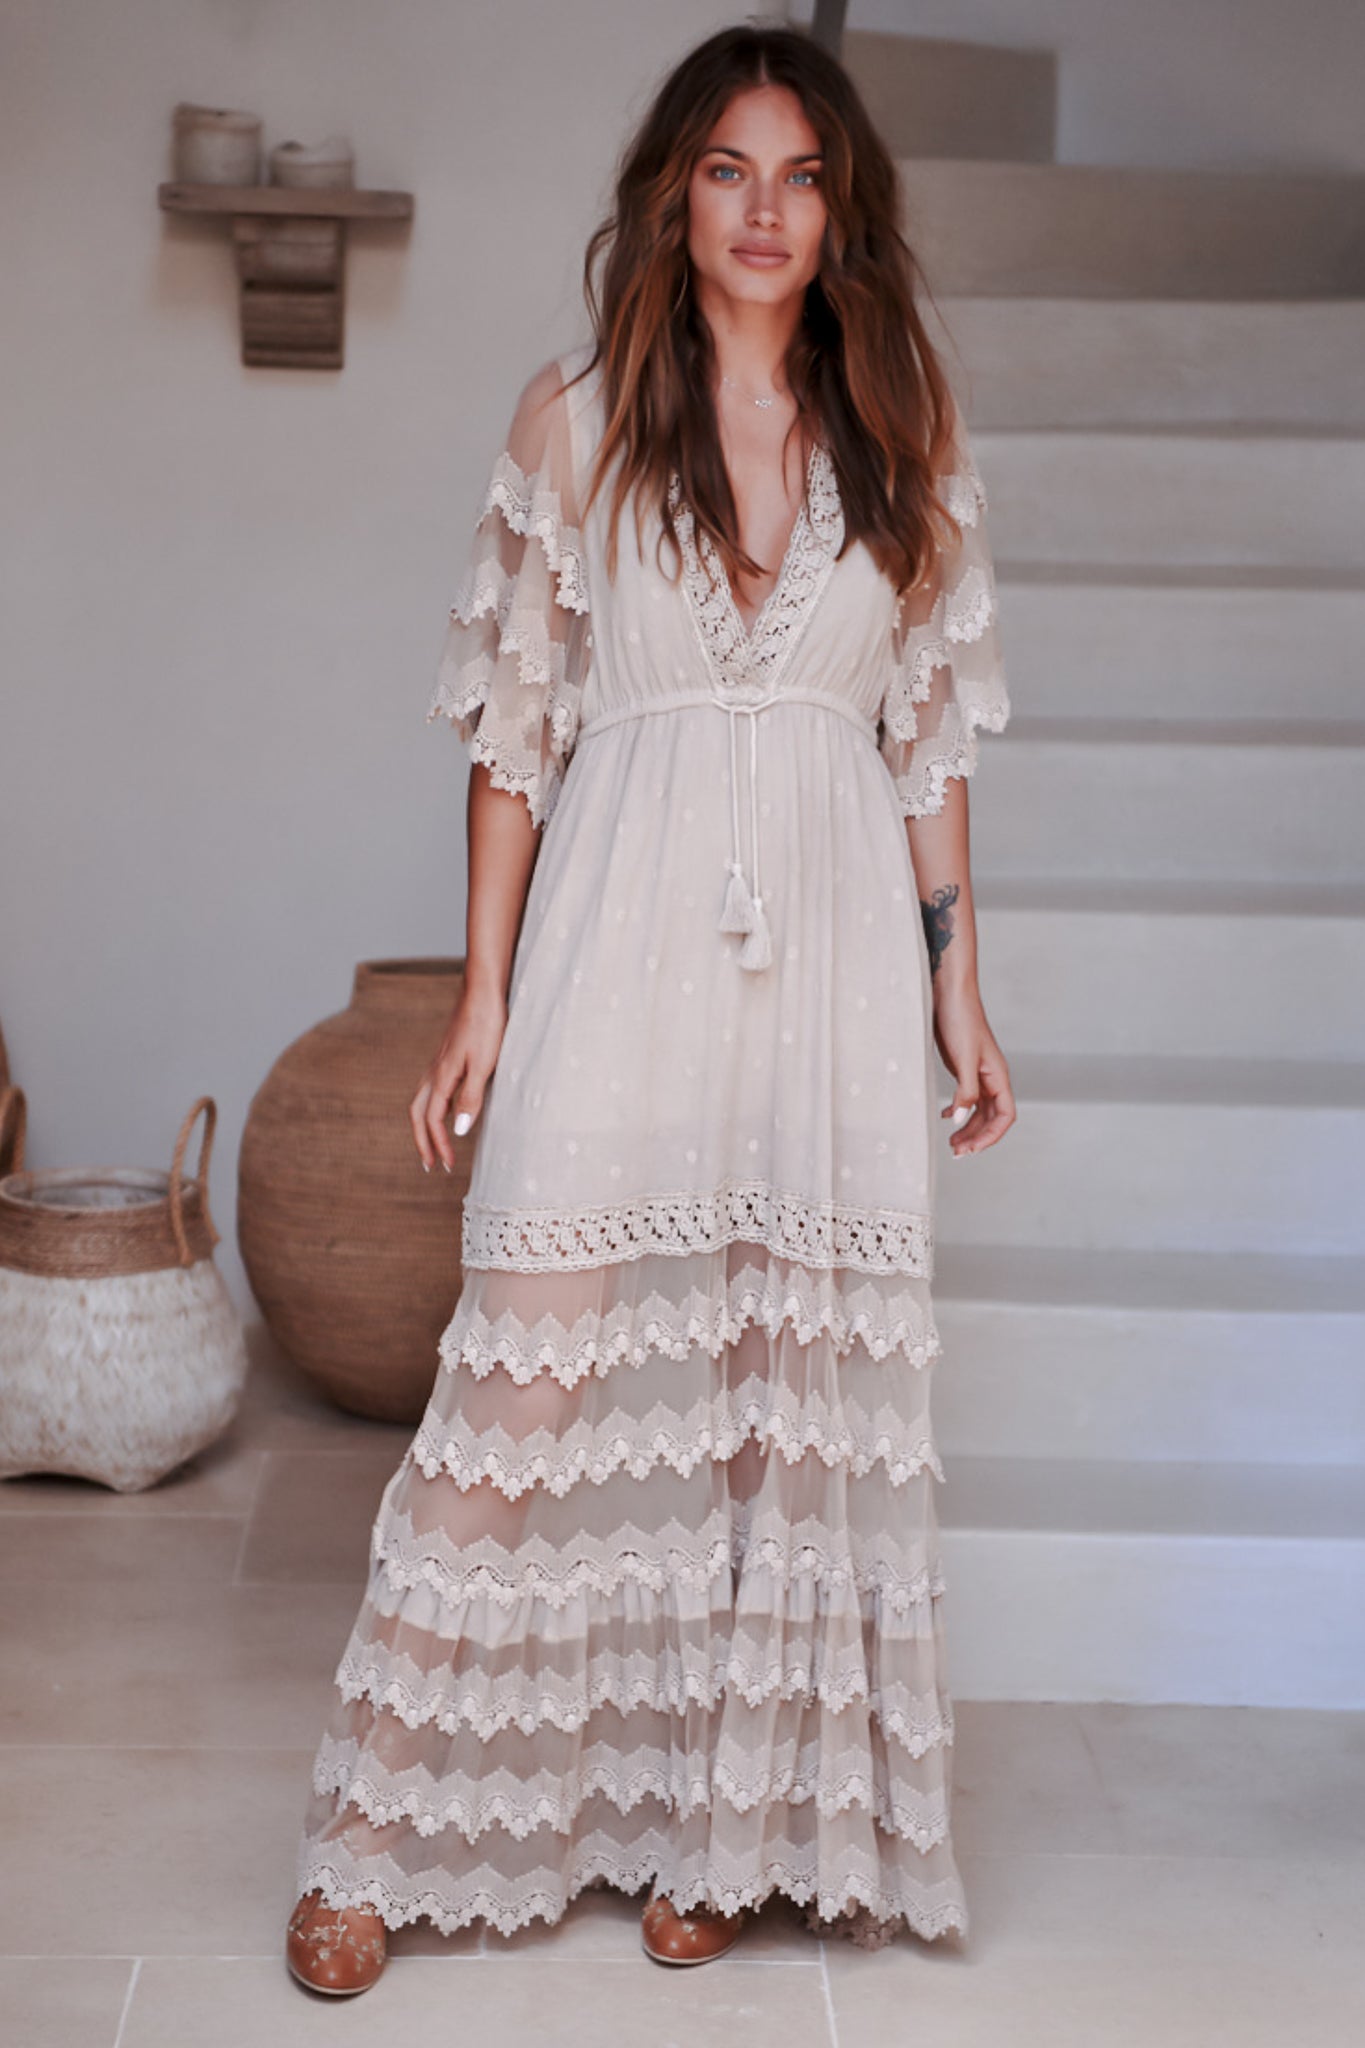 JAASE - Bungalow Maxi Dress: Emroidered Lace Deep V Neck Dress with Open Batwing Sleeves in Sand